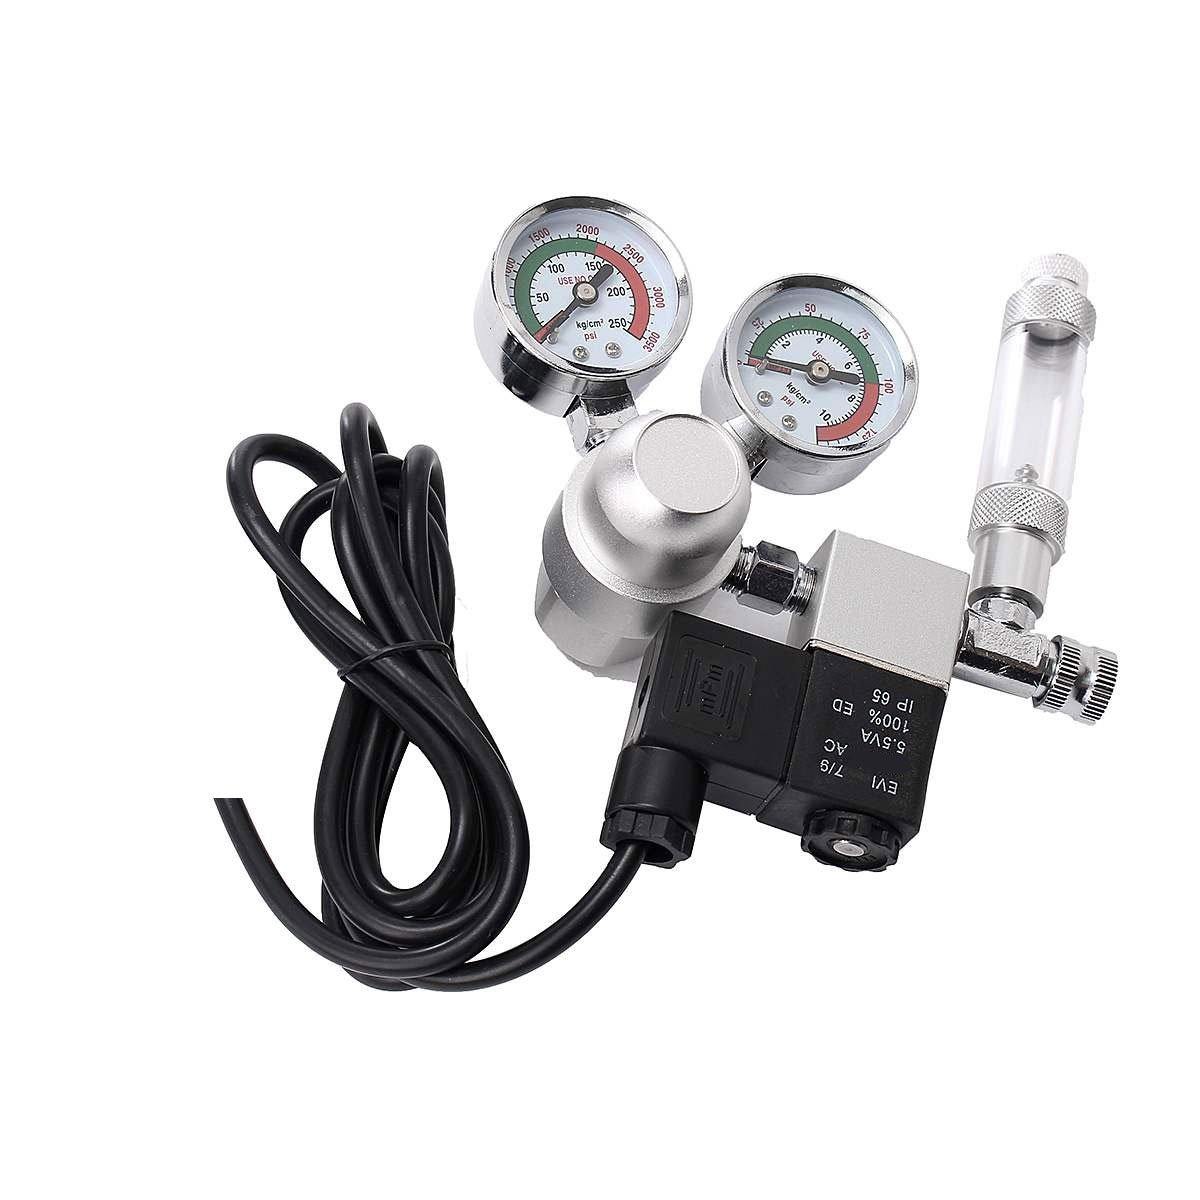 Dual Gauge Planted Aquarium Co2 Regulator With Solenoid and Bubble Counter (W21,8) - Suitable for Indian Fire Extinguisher Cylinders - PetzLifeWorld